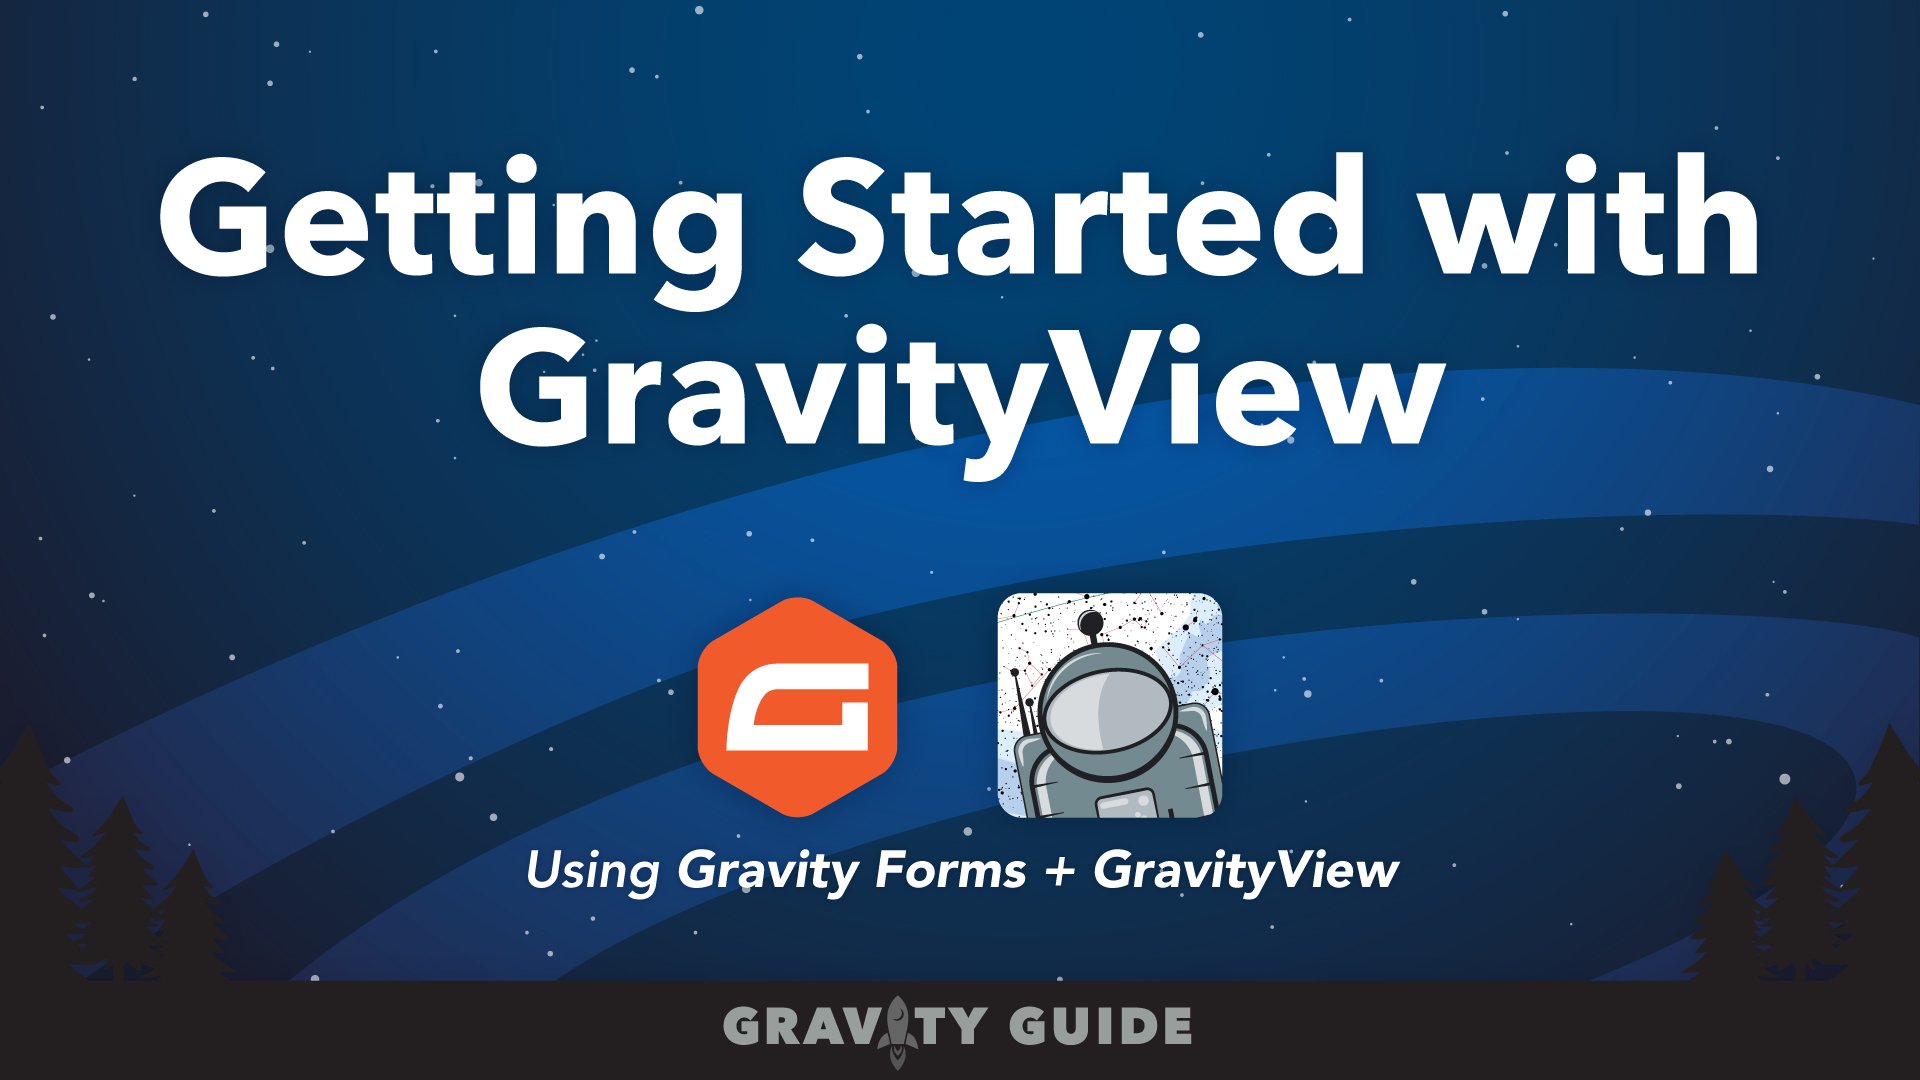 getting started with GravityView course on Gravity Guide